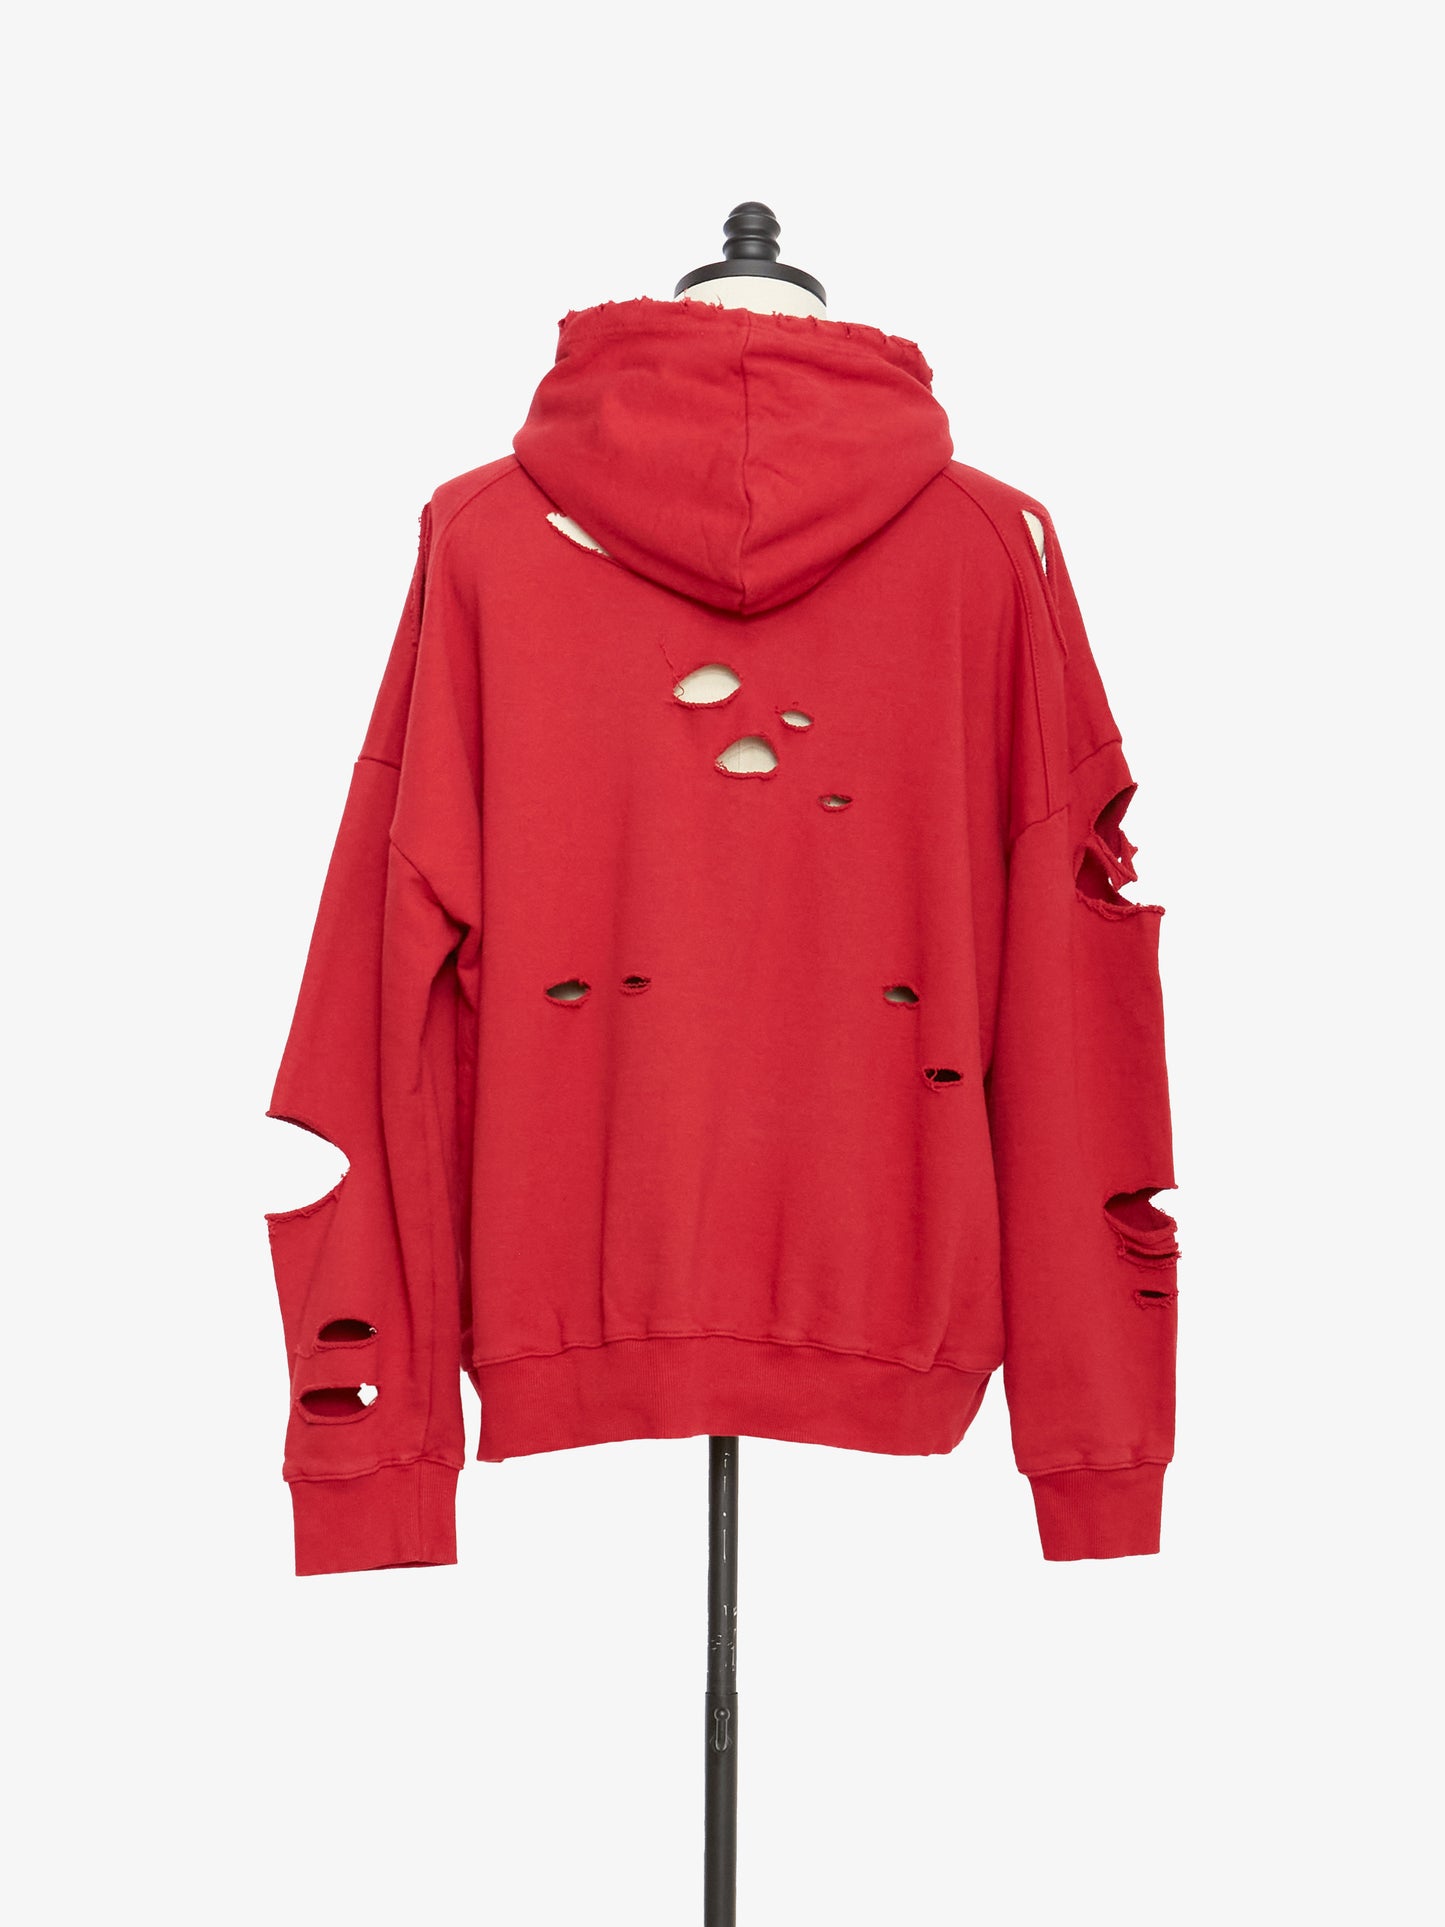 The Distressed Hoodie (Red)